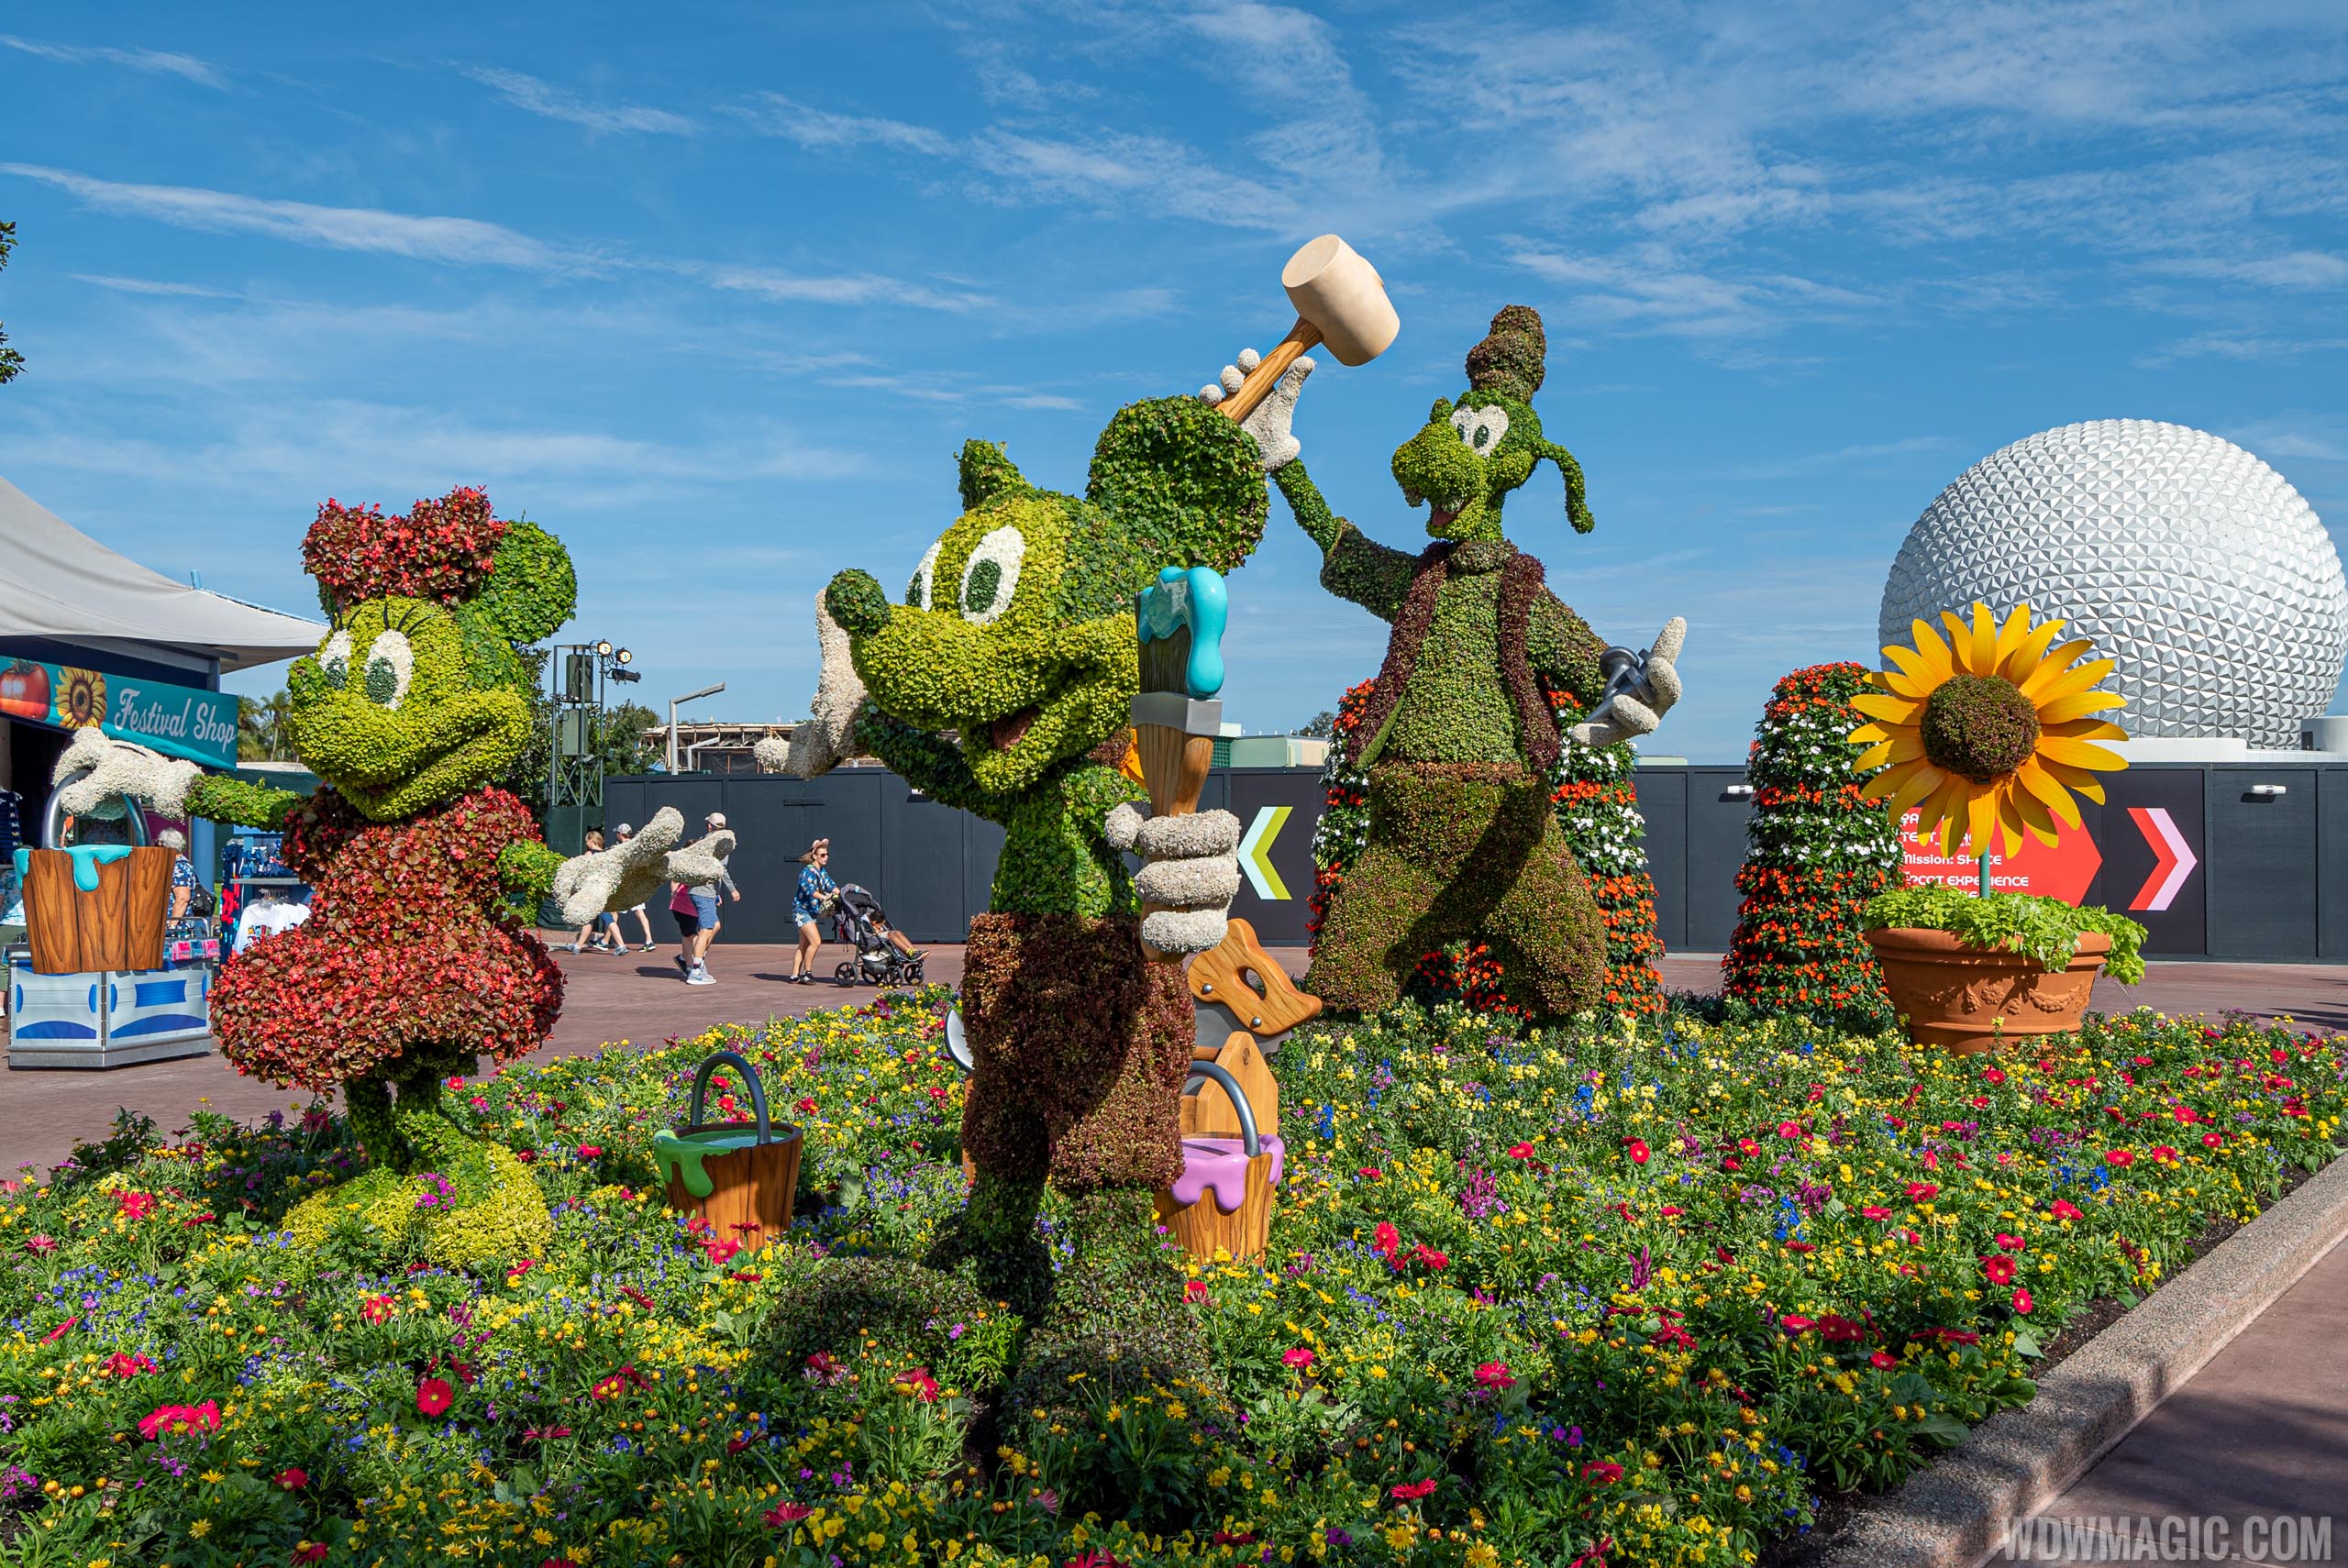 PHOTOS Tour of all the topiary at the 2020 Epcot International Flower